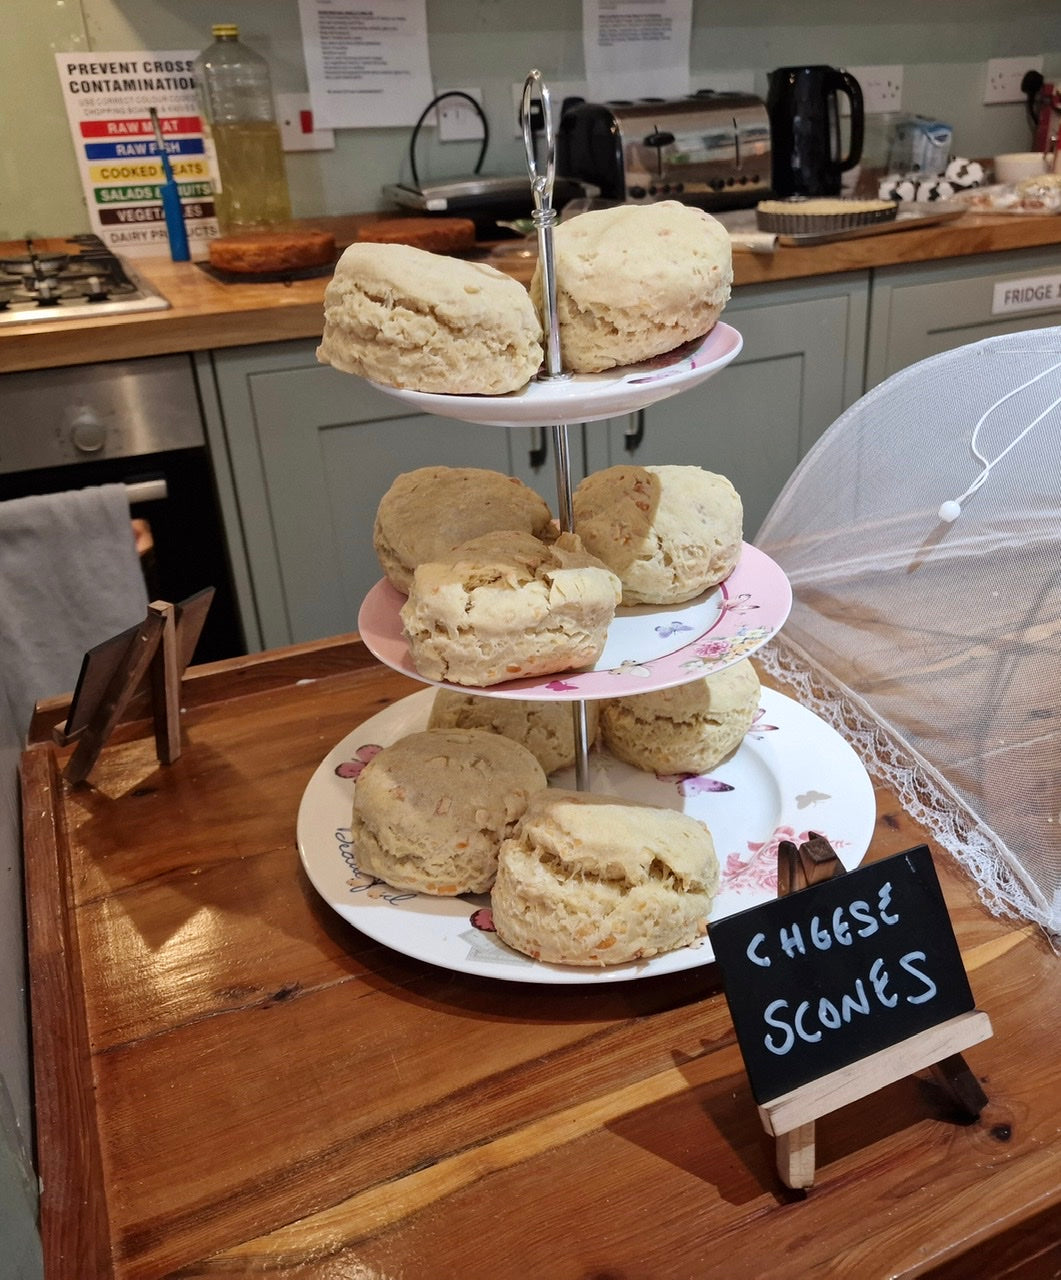 Visit Ri’s tearoom in our awesome Barn, The perfect spot for heavenly breakfasts, light lunches, and afternoon teas, homemade scones,  cakes. sandwiches.